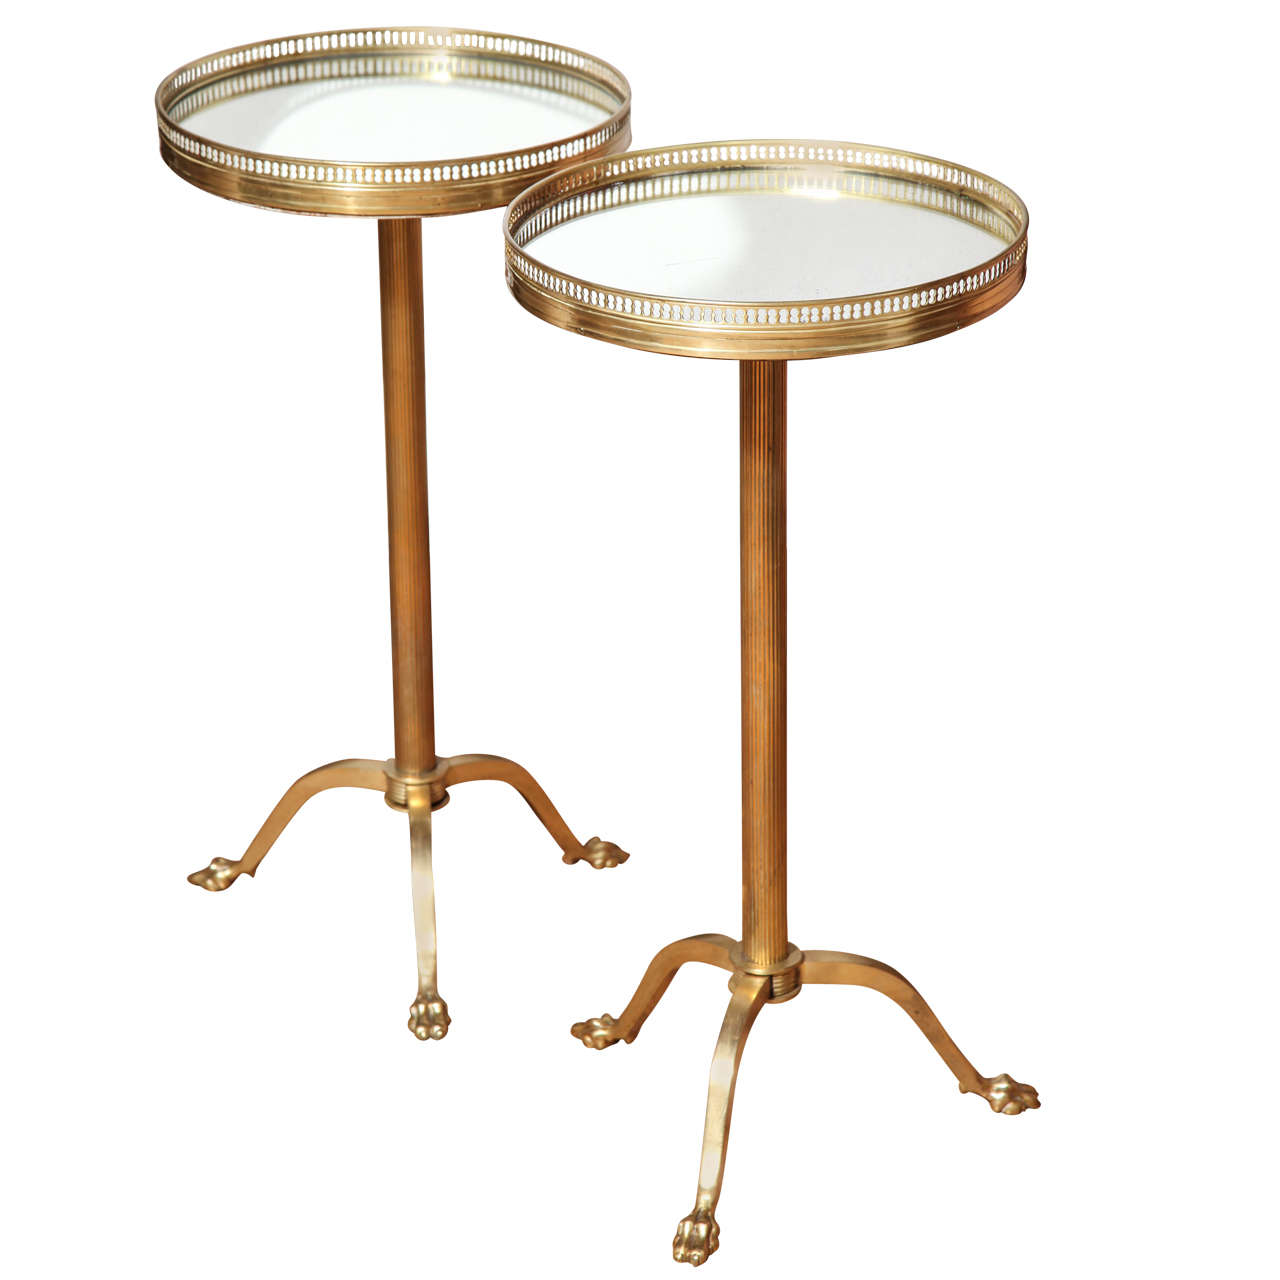 A Pair of Gilt Brass and Mirrored Topped Small Gueridon Tables, France c. 1950